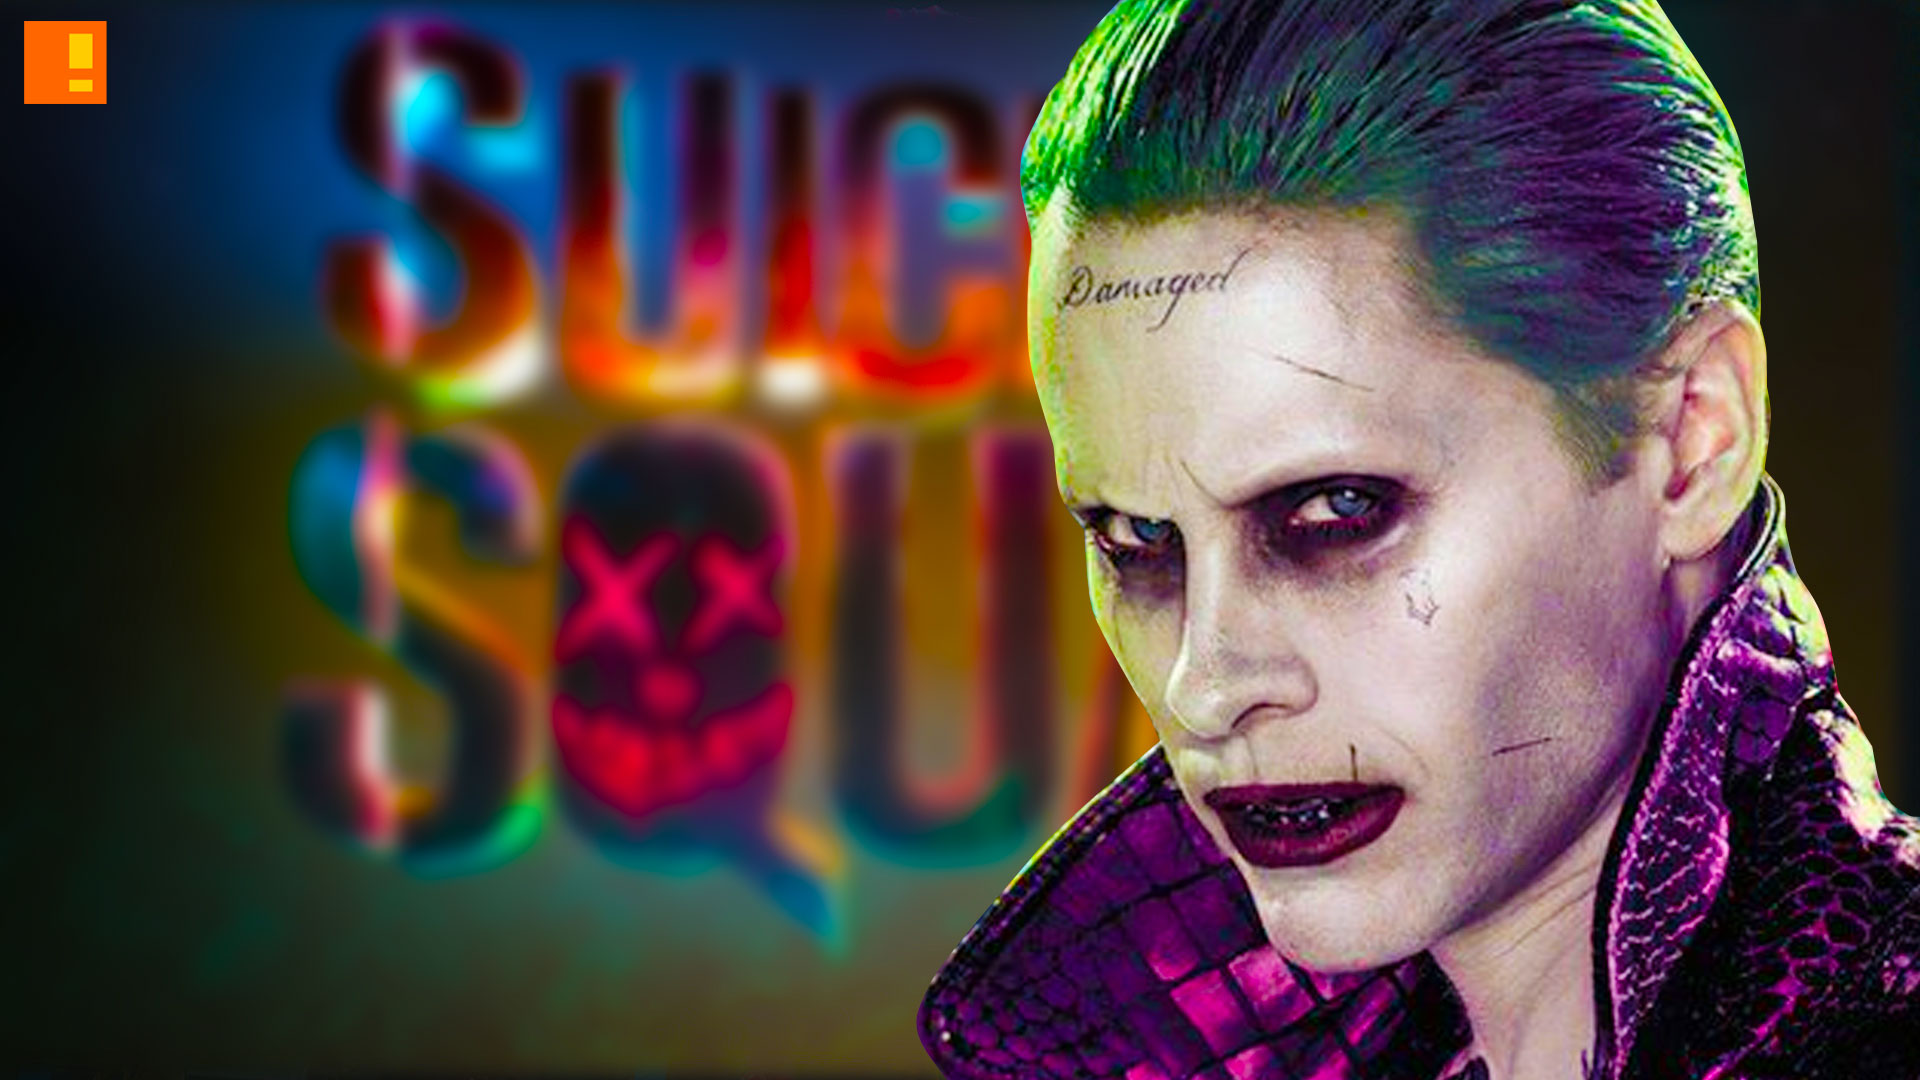 suicide squad, joker, banner, poster, entertainment on tap, the action pixel,